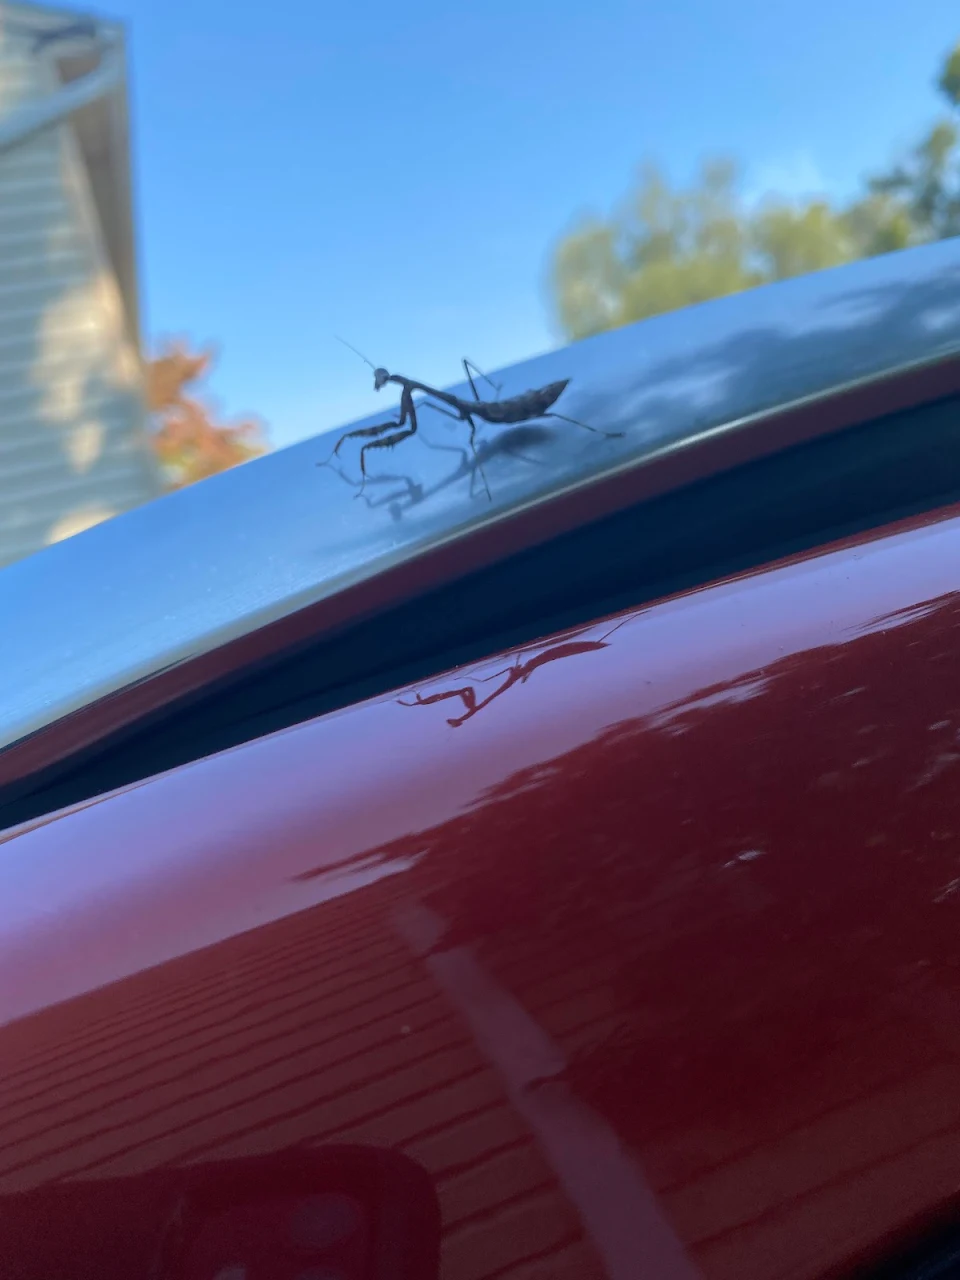 Tiny mantis hitched a ride this morning.